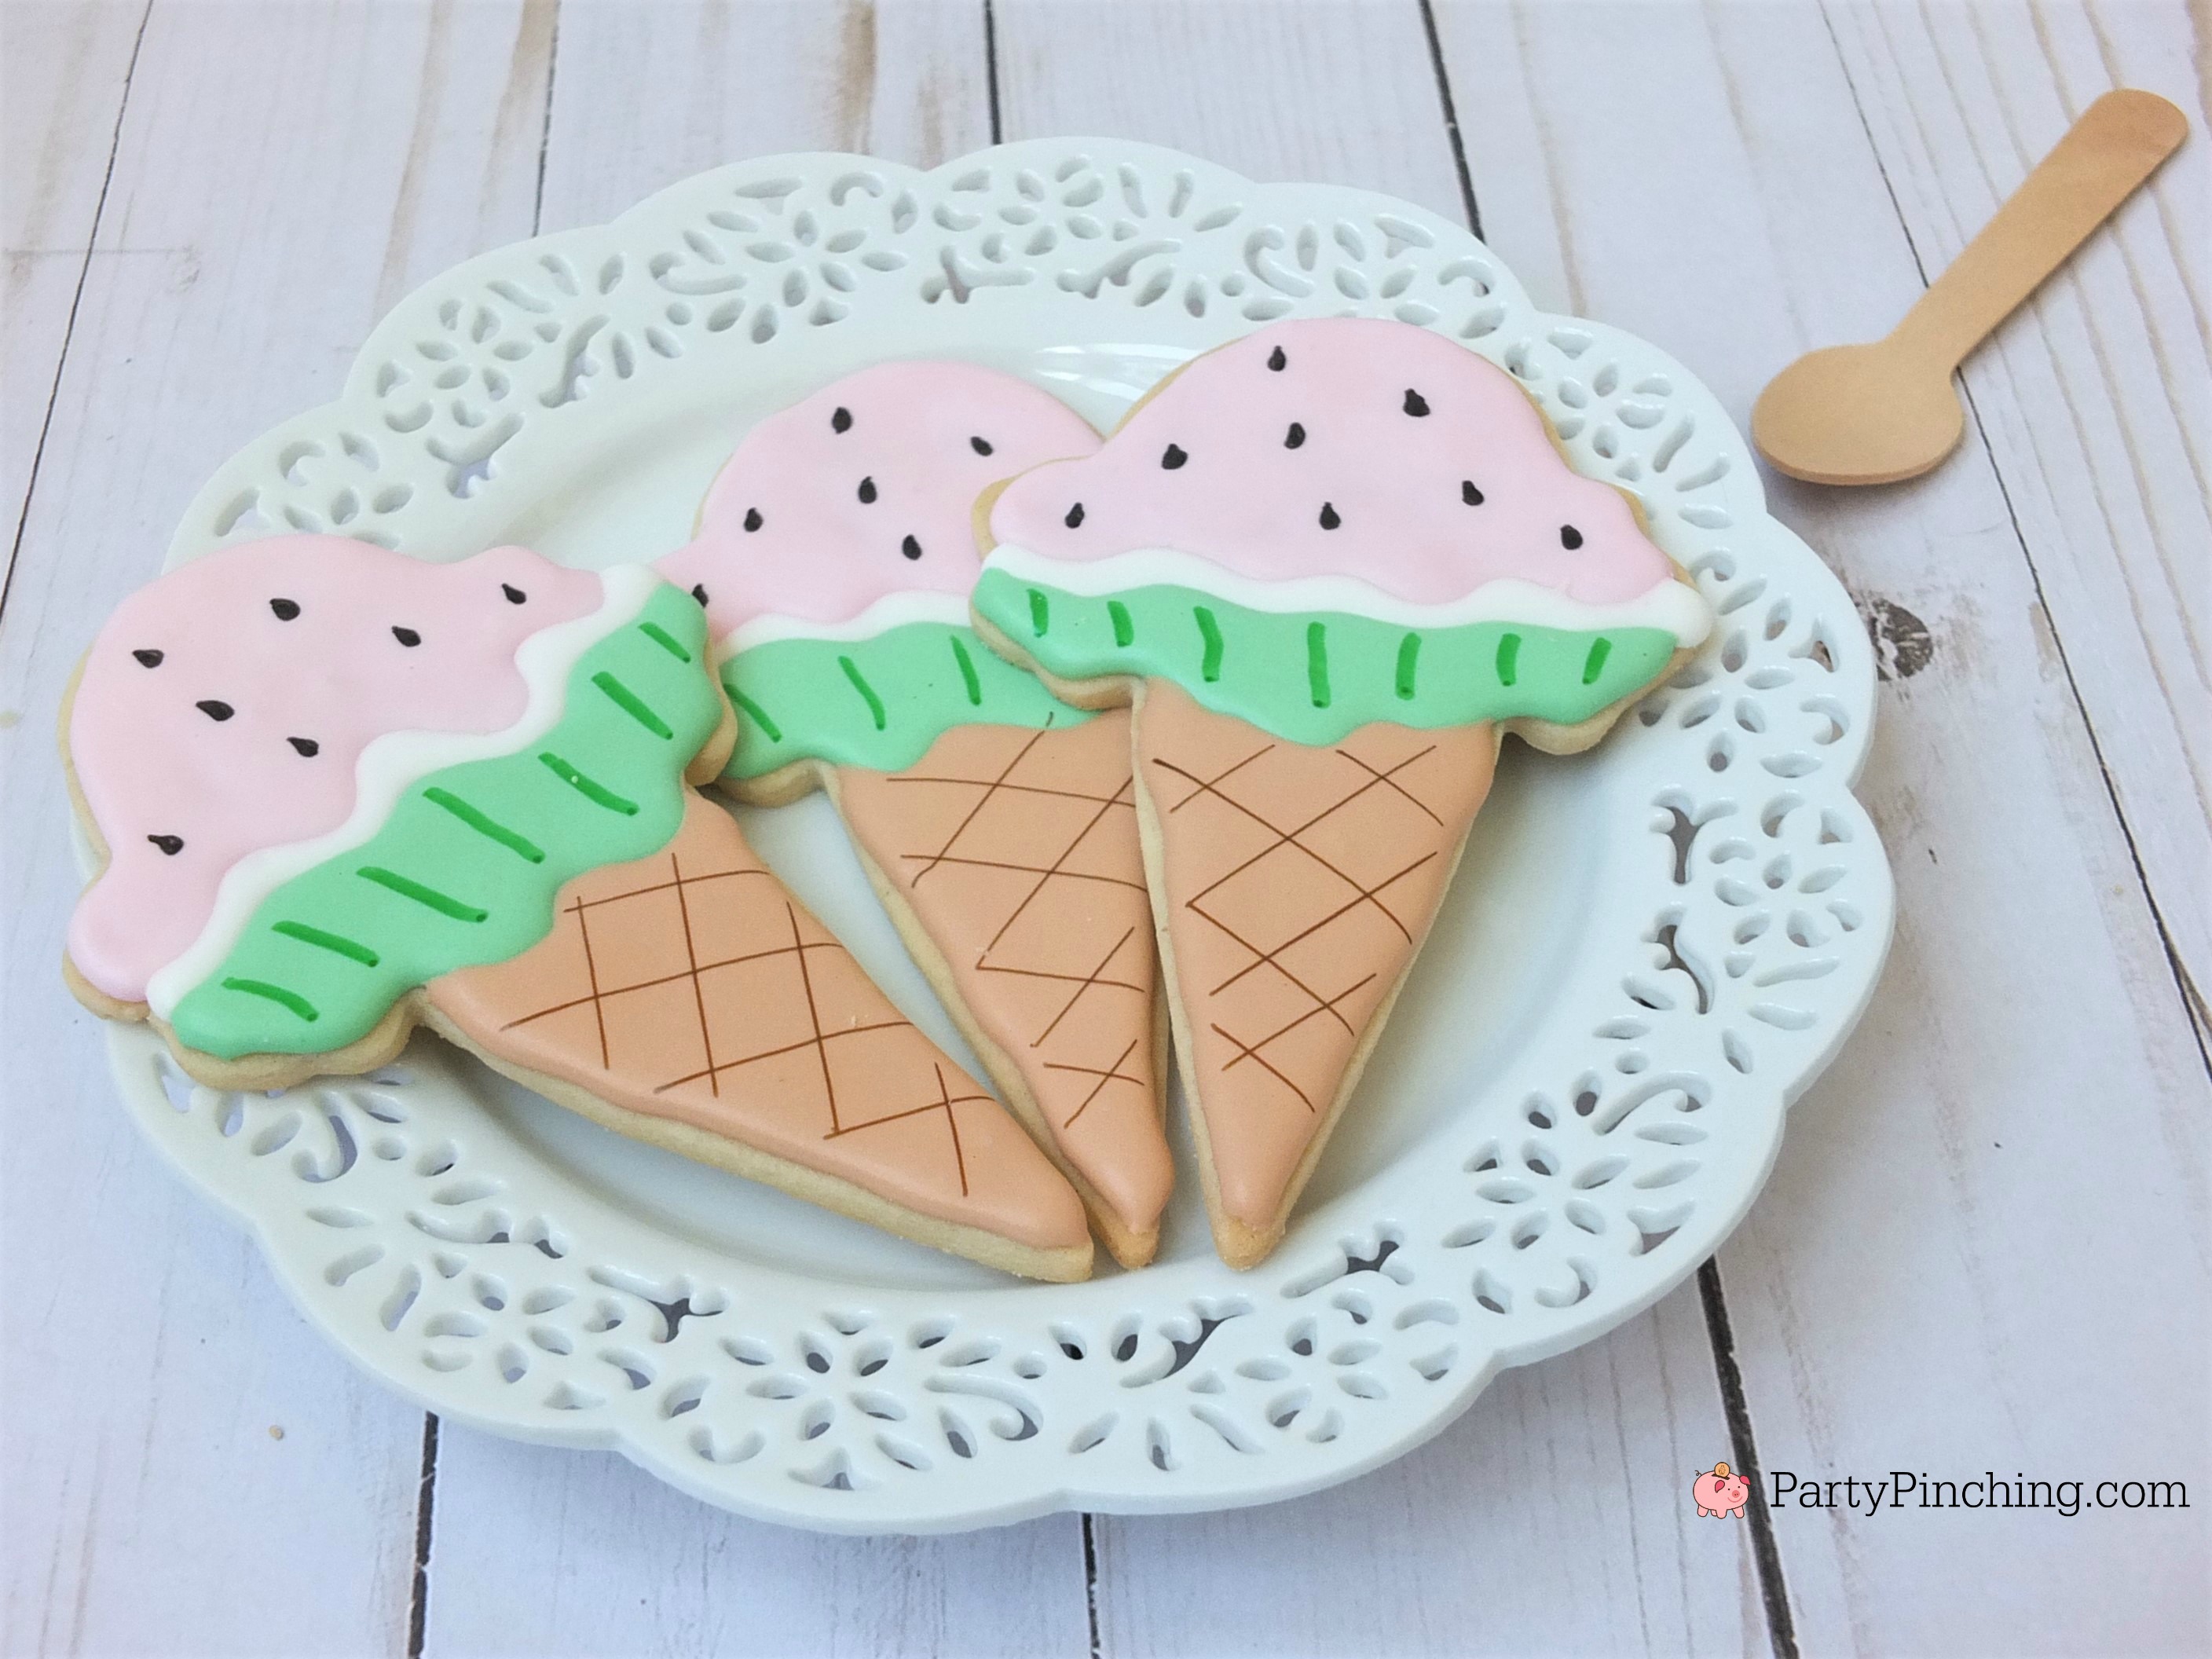 ice cream sugar cookies, ice cream decorated cookies with royal icing, mint chocolate chip ice cream cookies, cookies and cream ice cream cookies, Oreo ice cream cookies, neopolitan ice cream sugar cookies, rainbow sherbet sugar cookies, watermelon ice cream sugar cookies, cute food, cute cookies, summer cookies treats